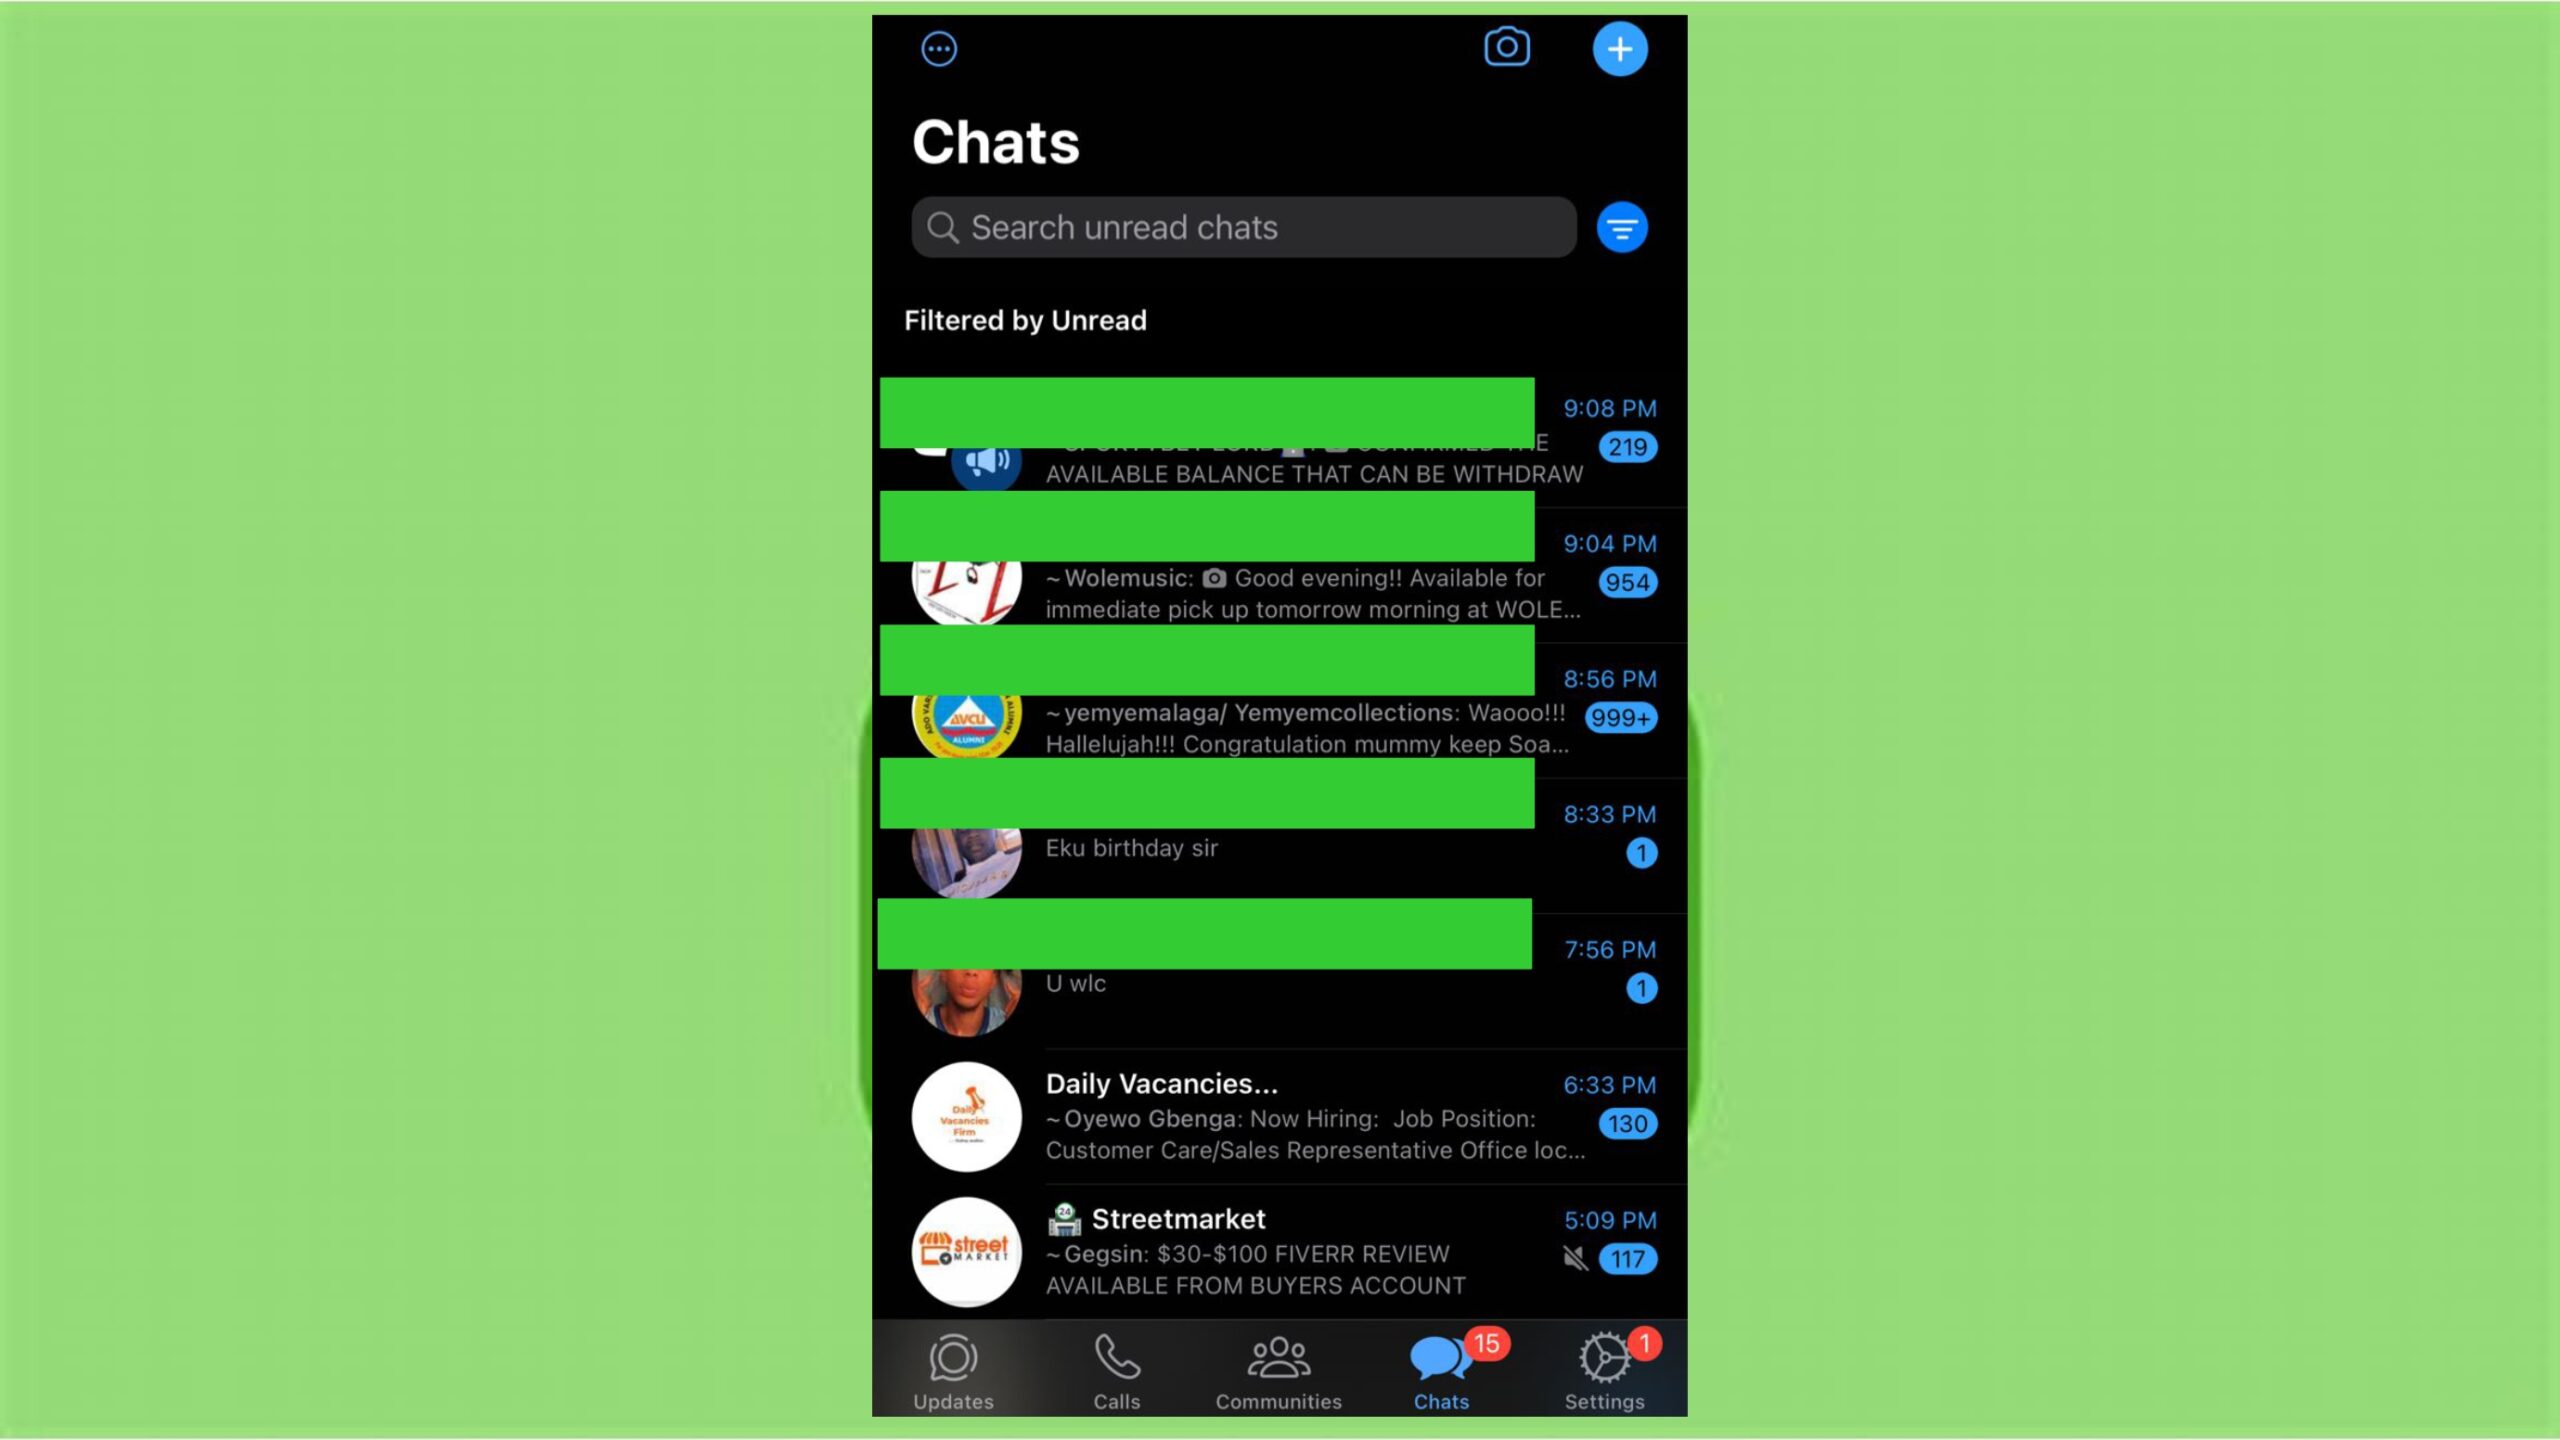 WhatsApp’s new Chat Filters feature makes chat more fun